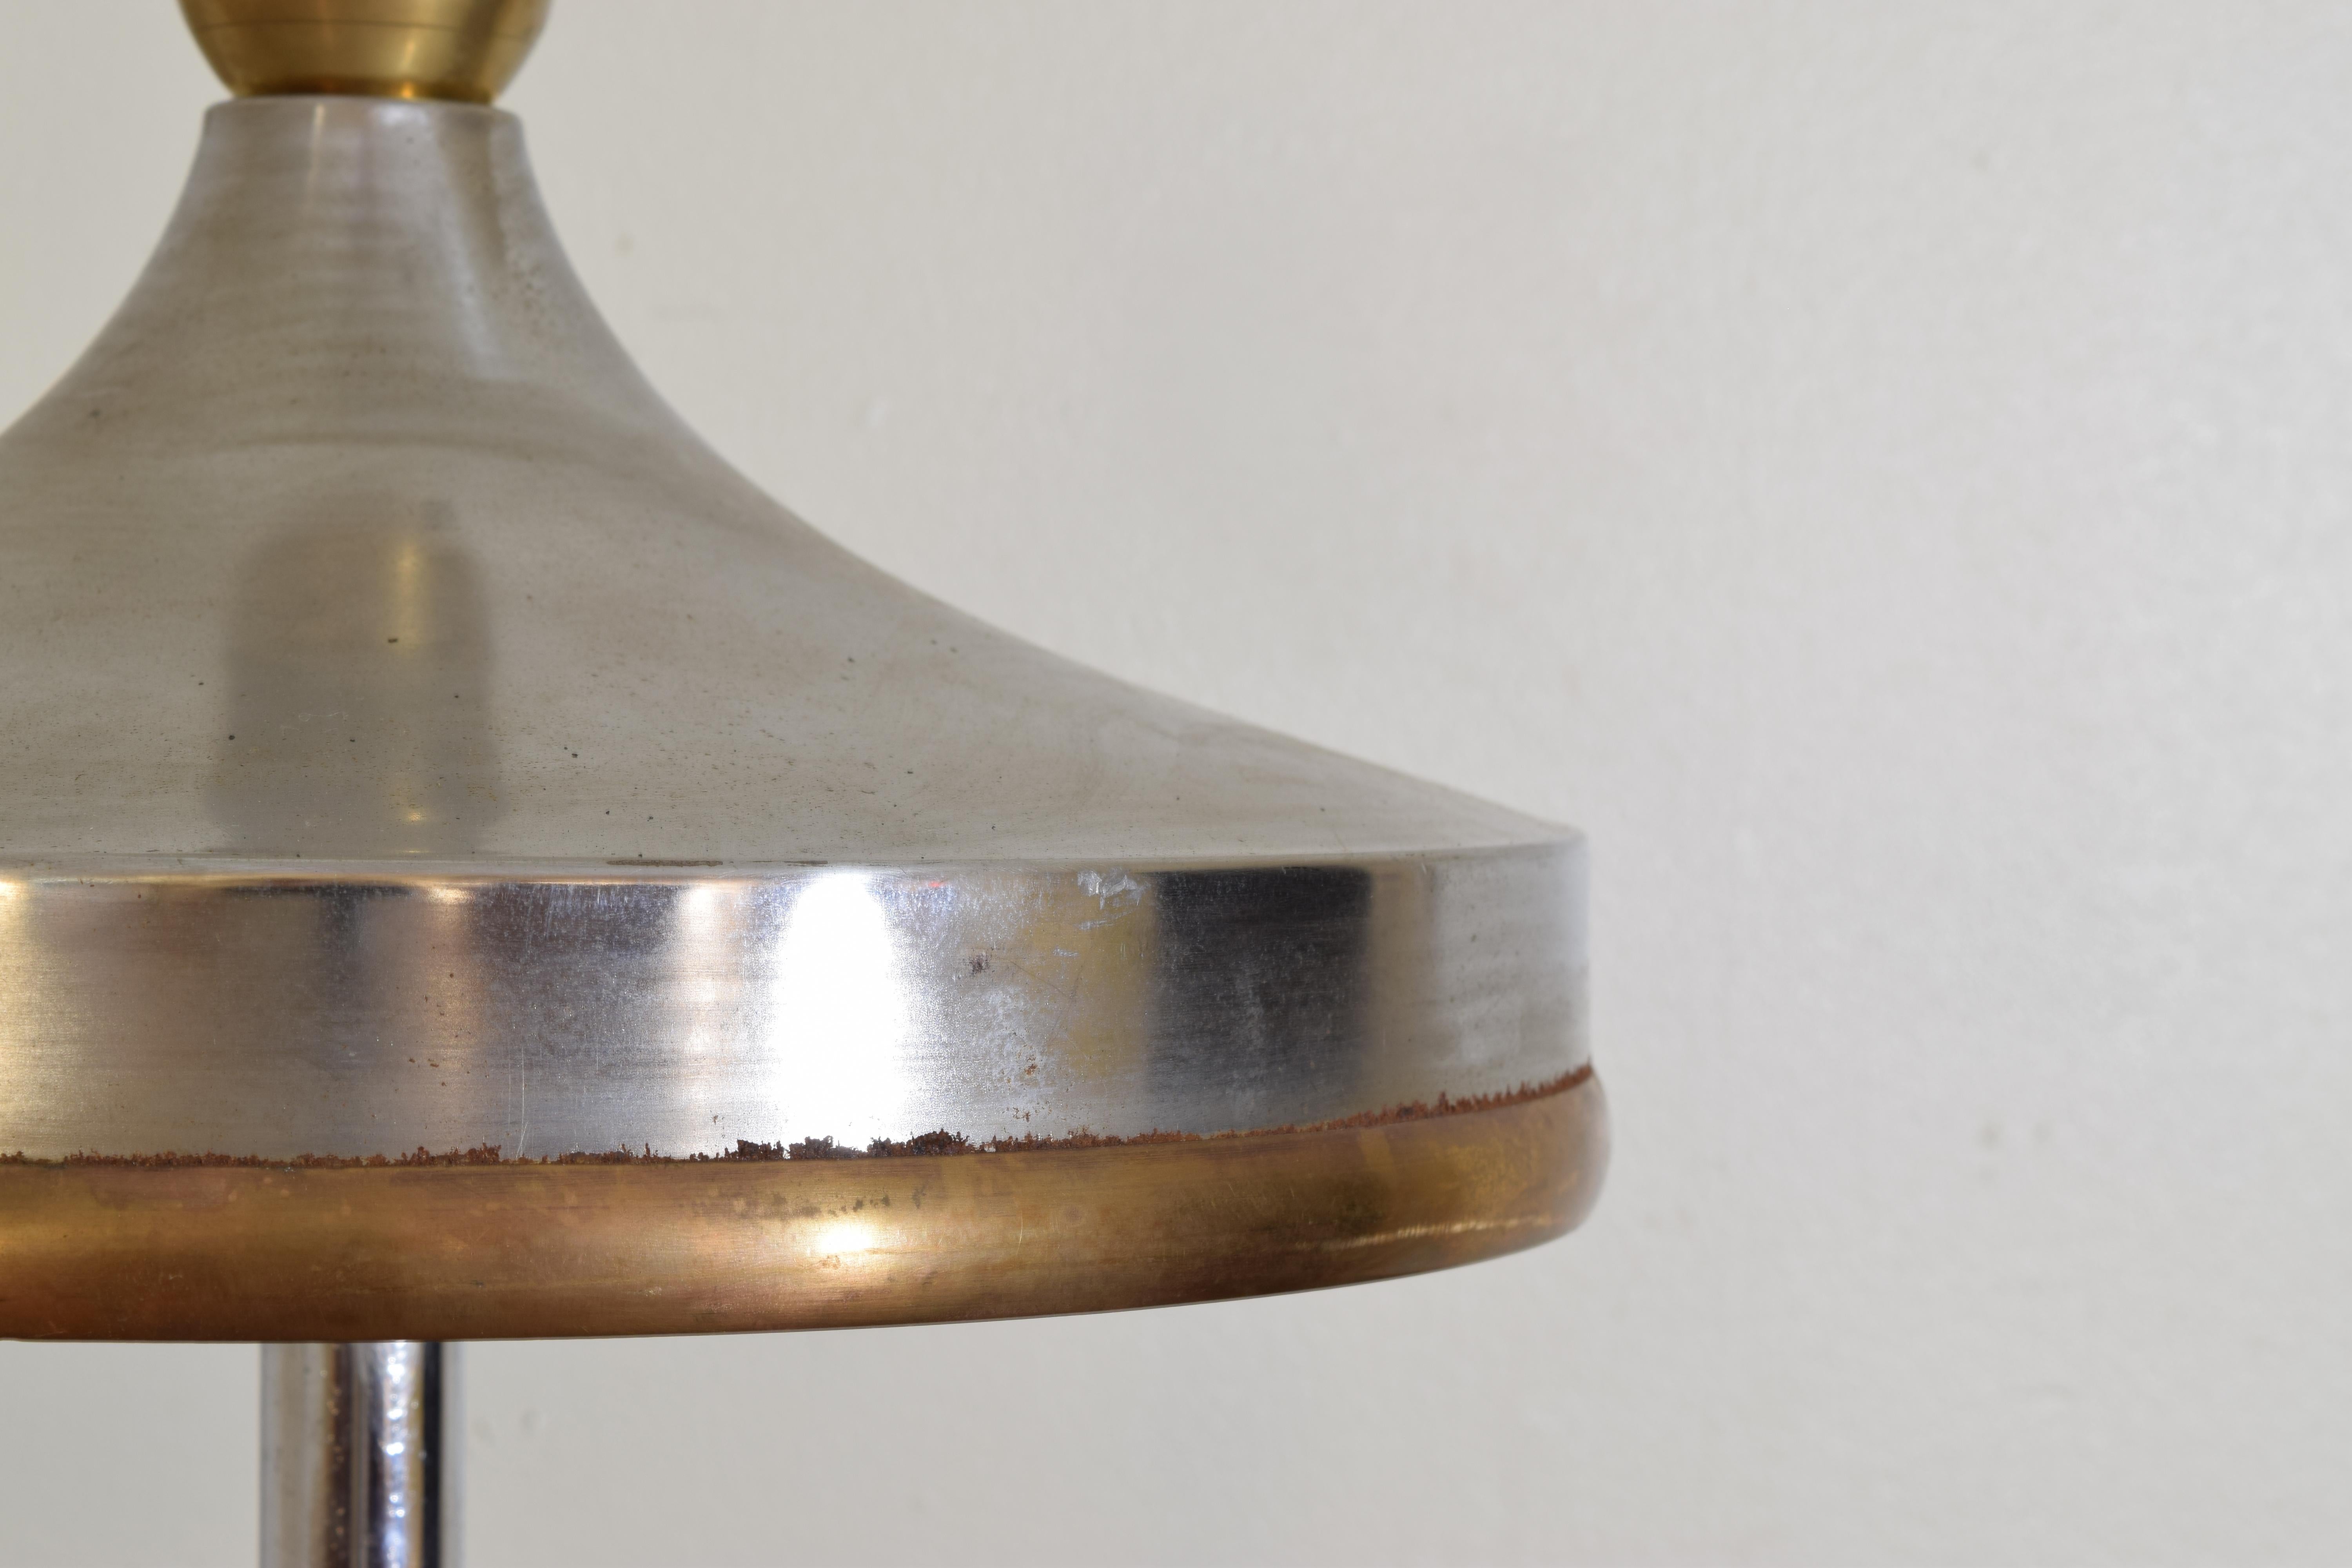 Mid-20th Century Italian Mid Century Modern Chrome and Brass Table Lamp, early 2nd half 20th cen. For Sale